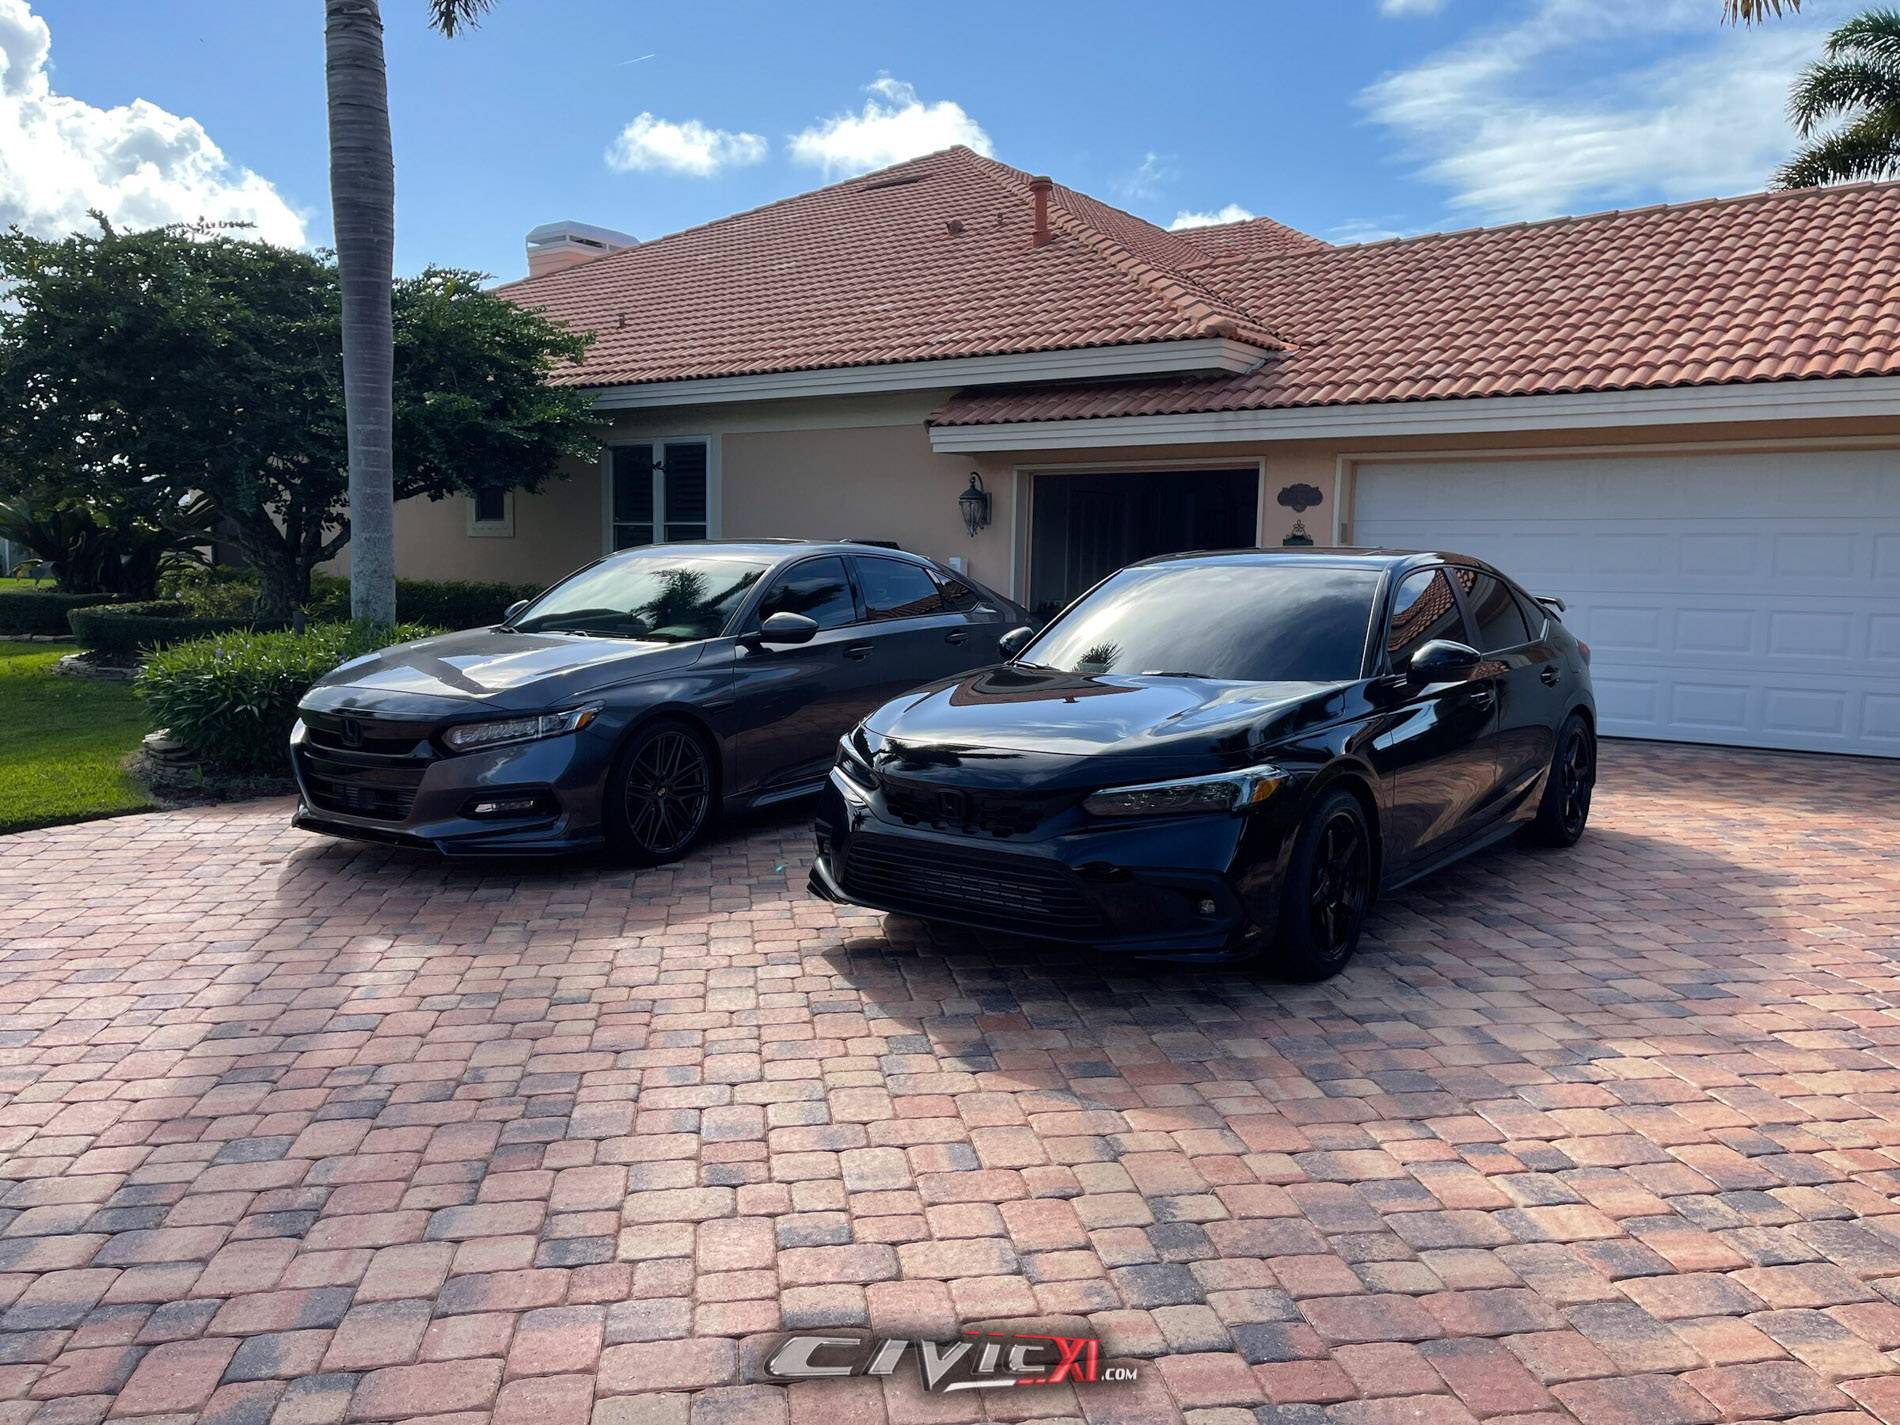 11th Gen Honda Civic Project "Wednesday" Murdered Out 2022 Civic Sport Touring C5E22D98-7470-4D35-B272-4DC1D083BBAC